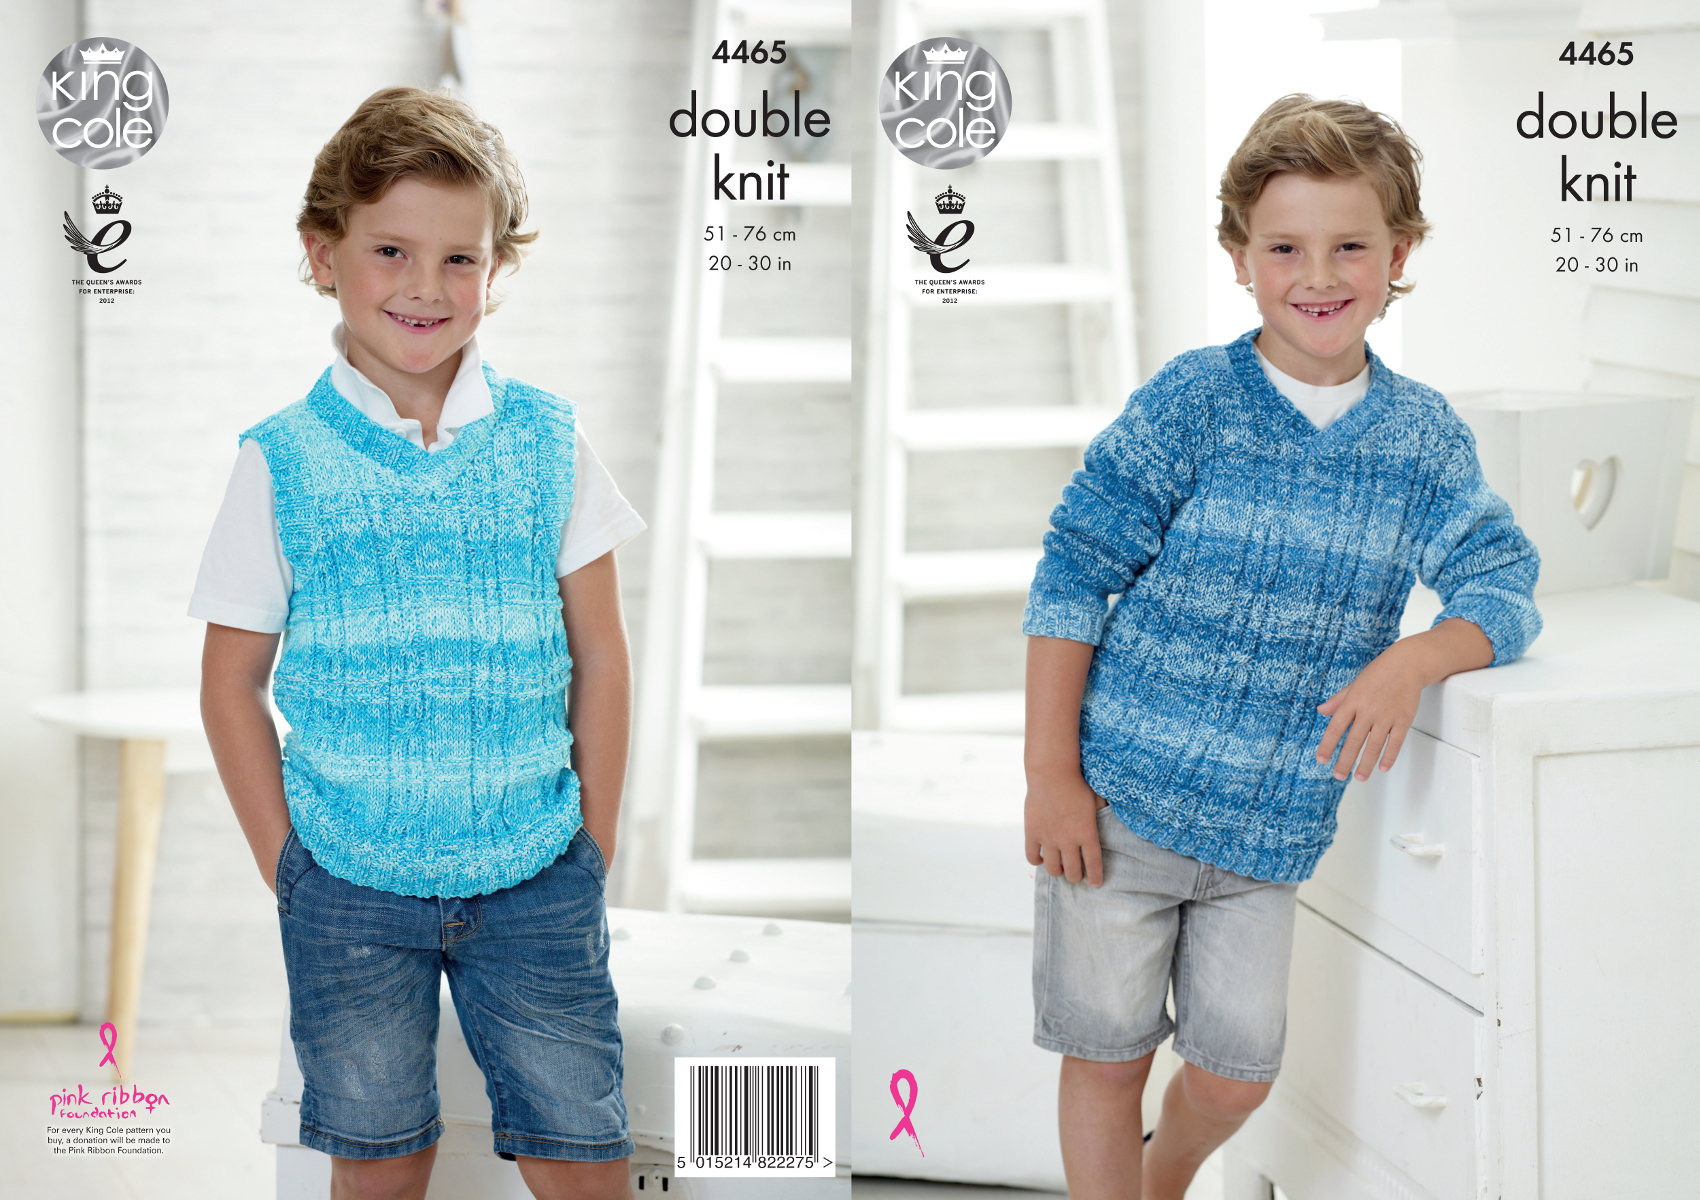 Knitted Tank Top Patterns Details About King Cole Boys Double Knitting Pattern V Neck Sweater Tank Top Vogue Dk 4465